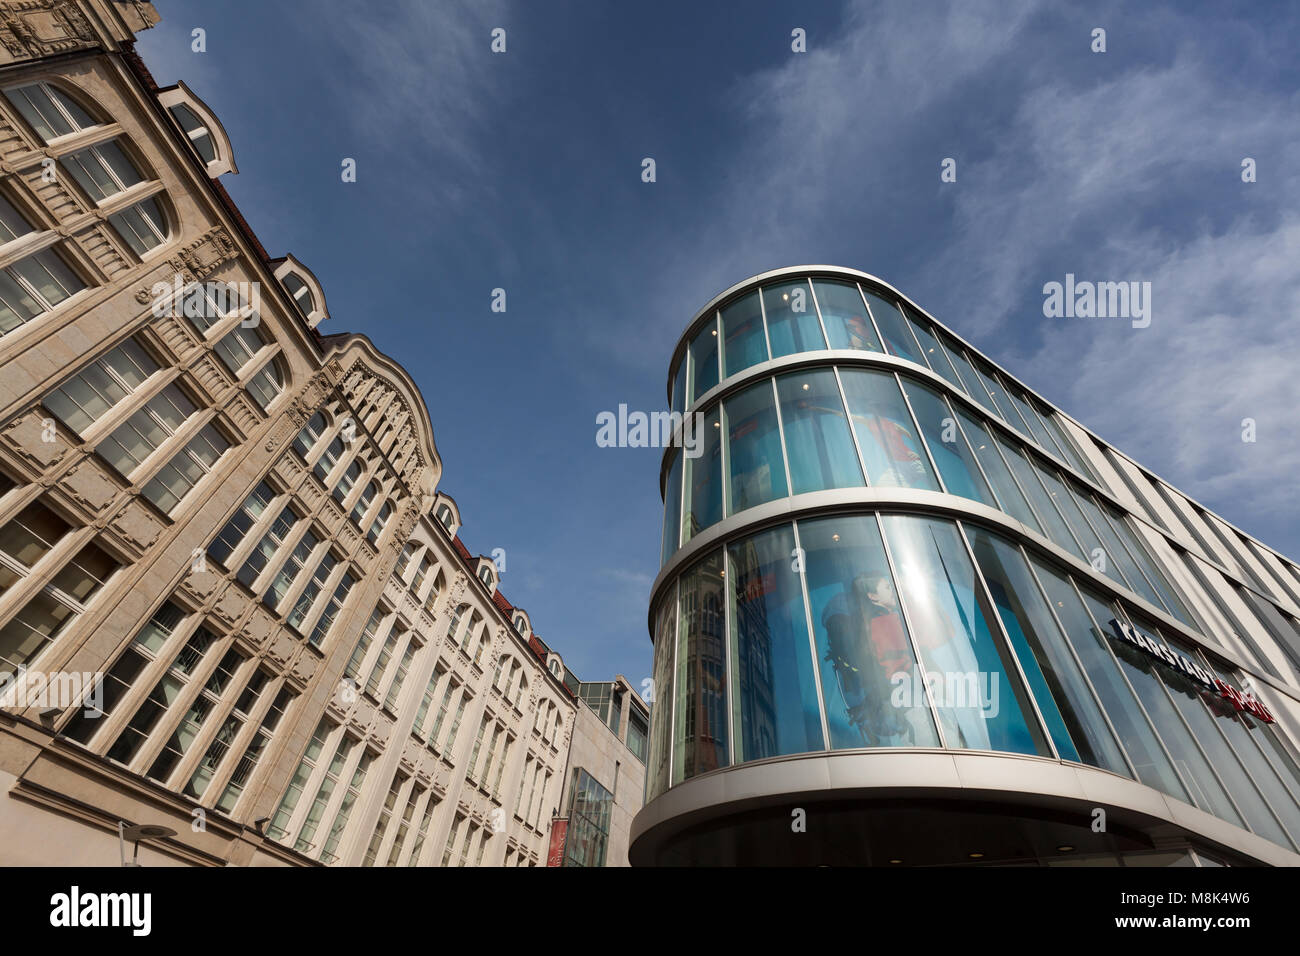 Old sandstone and modern glass facades side by side in downtown Erfurt, Germany Stock Photo